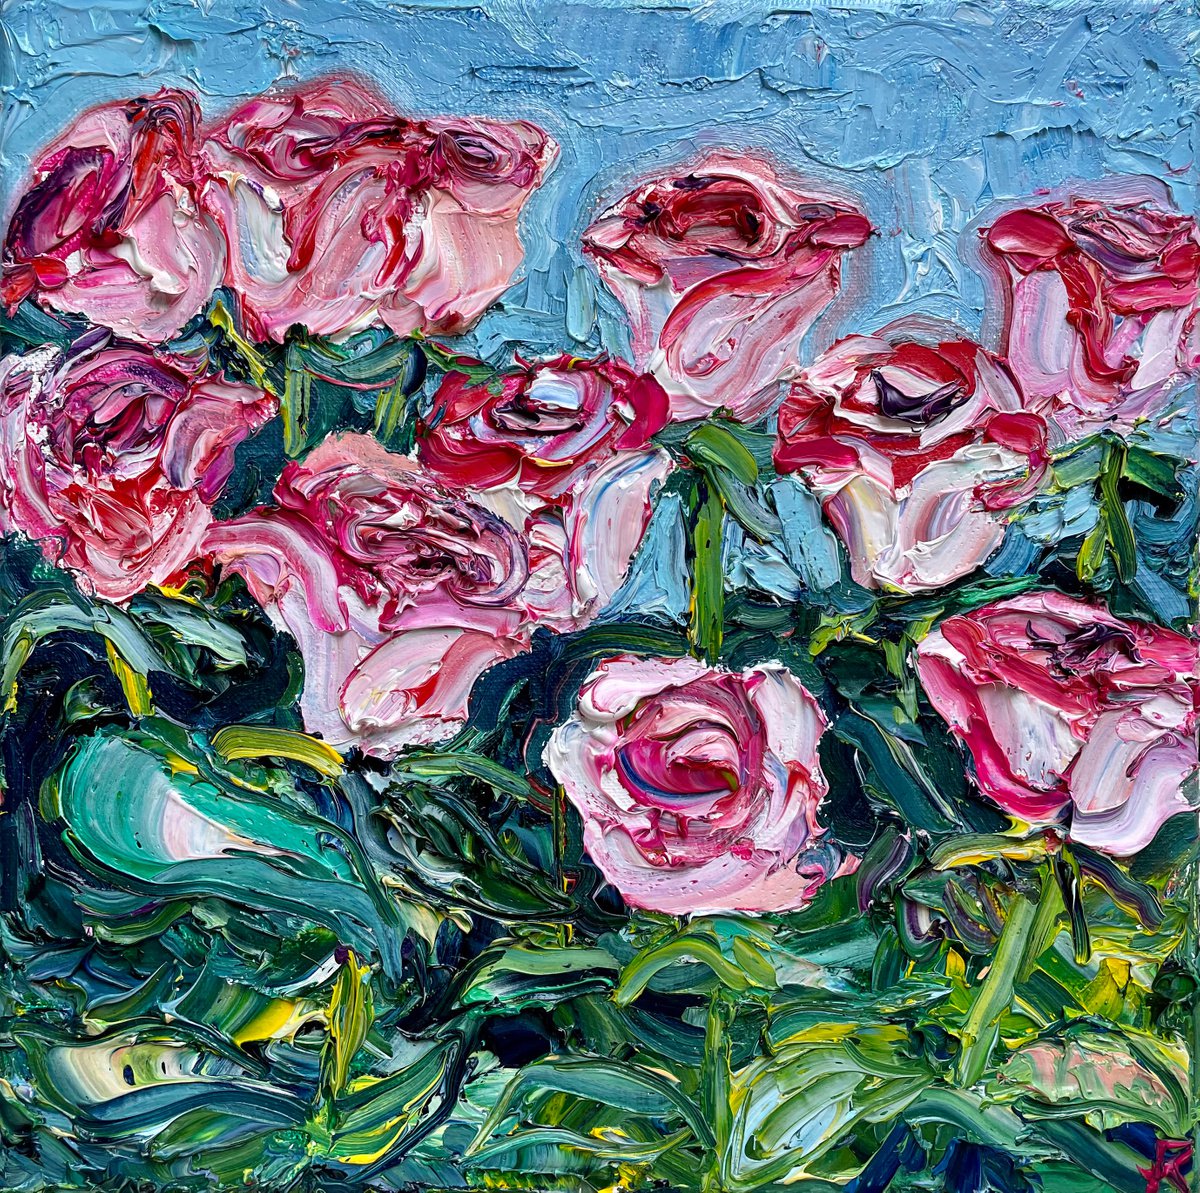 Roses Original Oil Painting on Canvas, Textured Wall Art, Flower Artwork, Romantic Gift fo... by Kate Grishakova